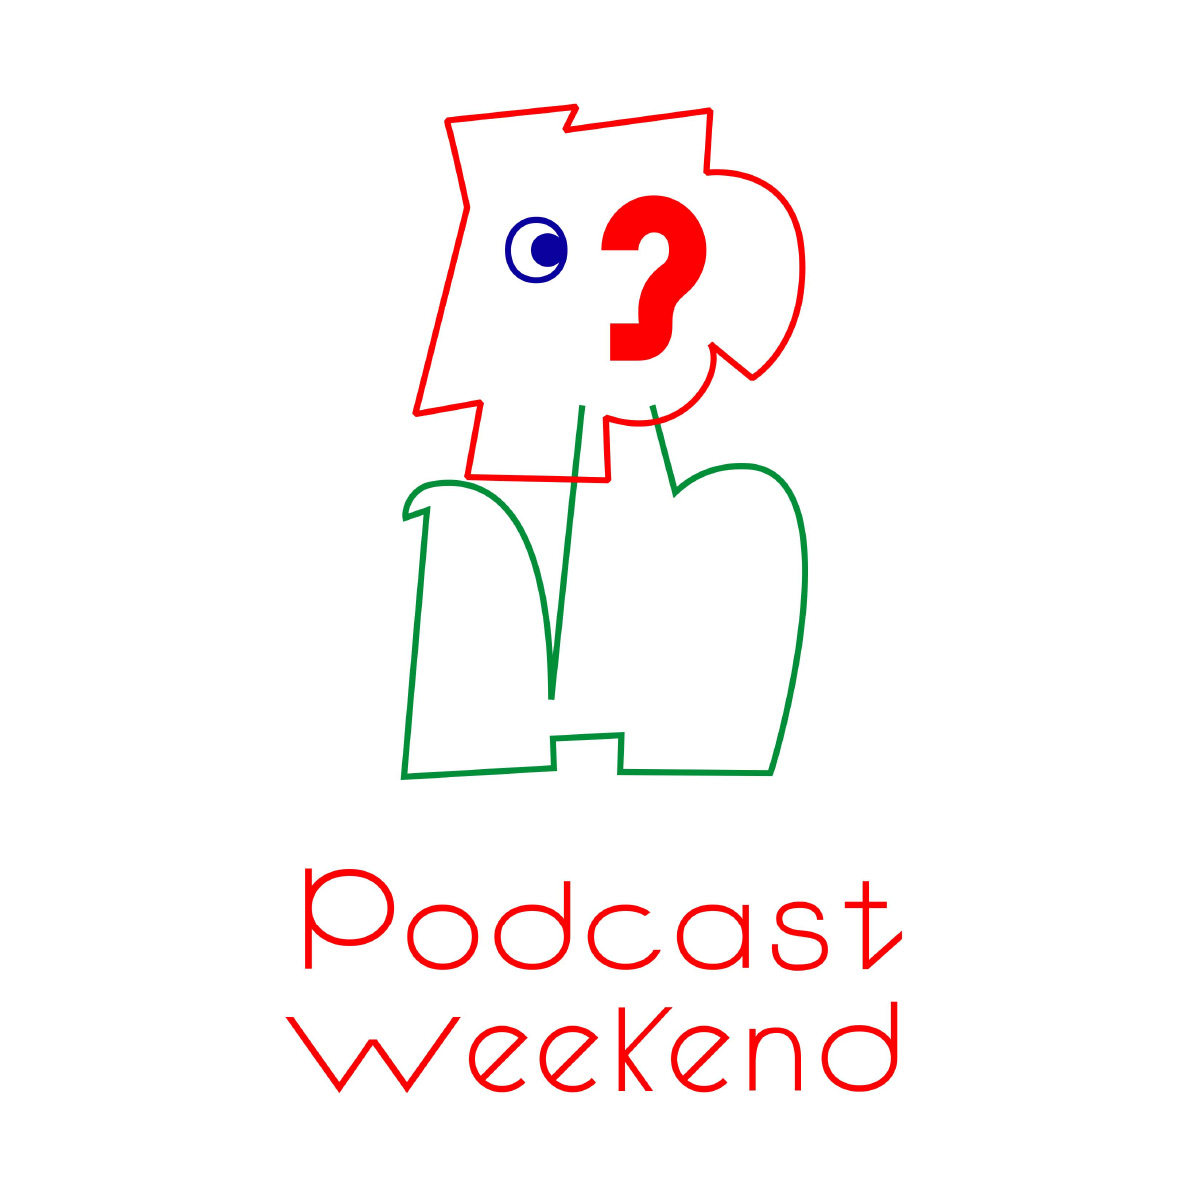 Podcast Weekend, Ppodcast